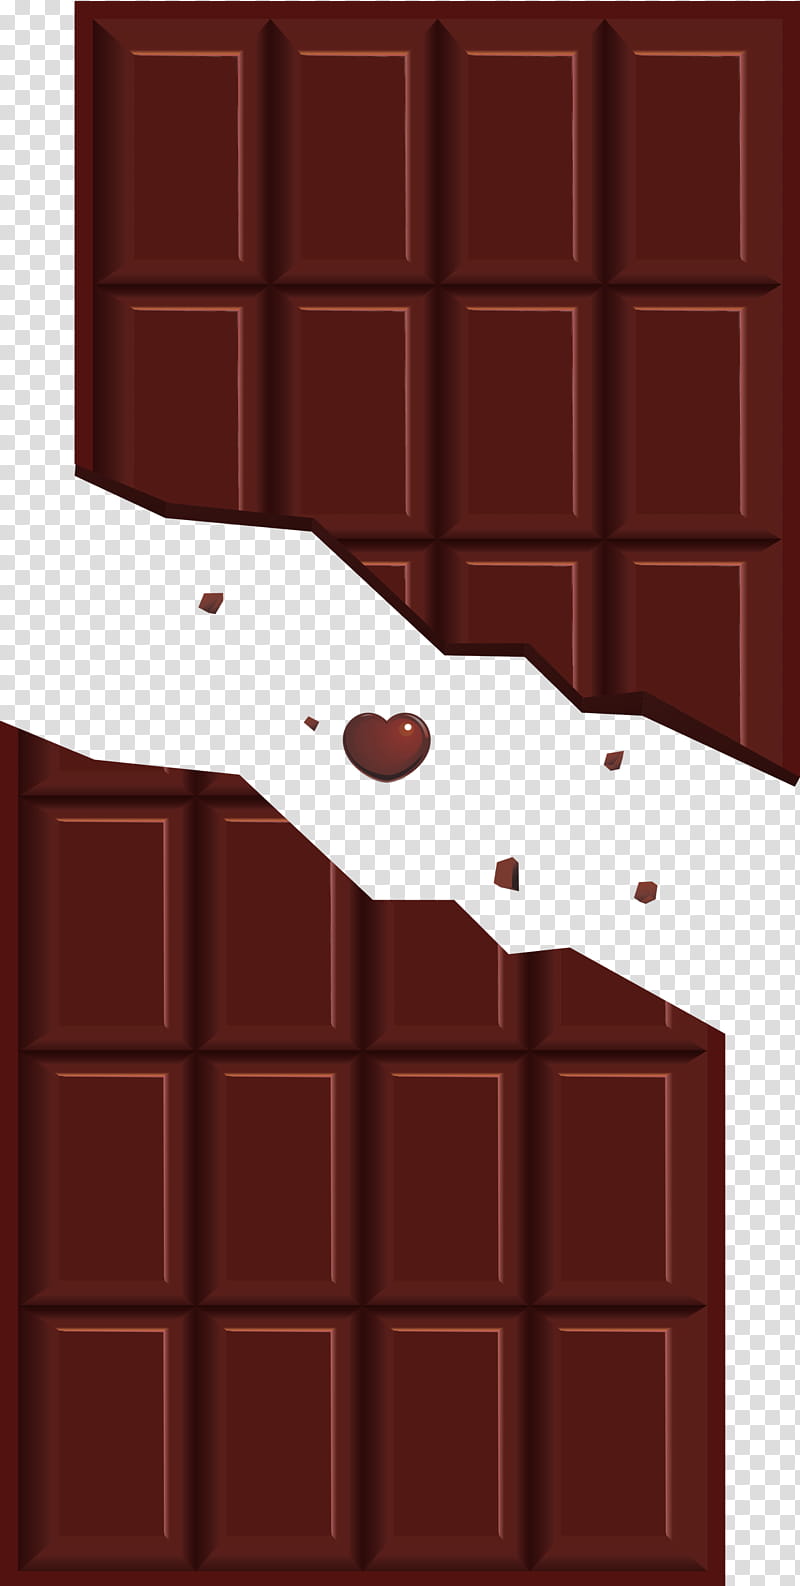 Wallpapers Chocolate Cliparts, Stock Vector and Royalty Free Wallpapers  Chocolate Illustrations